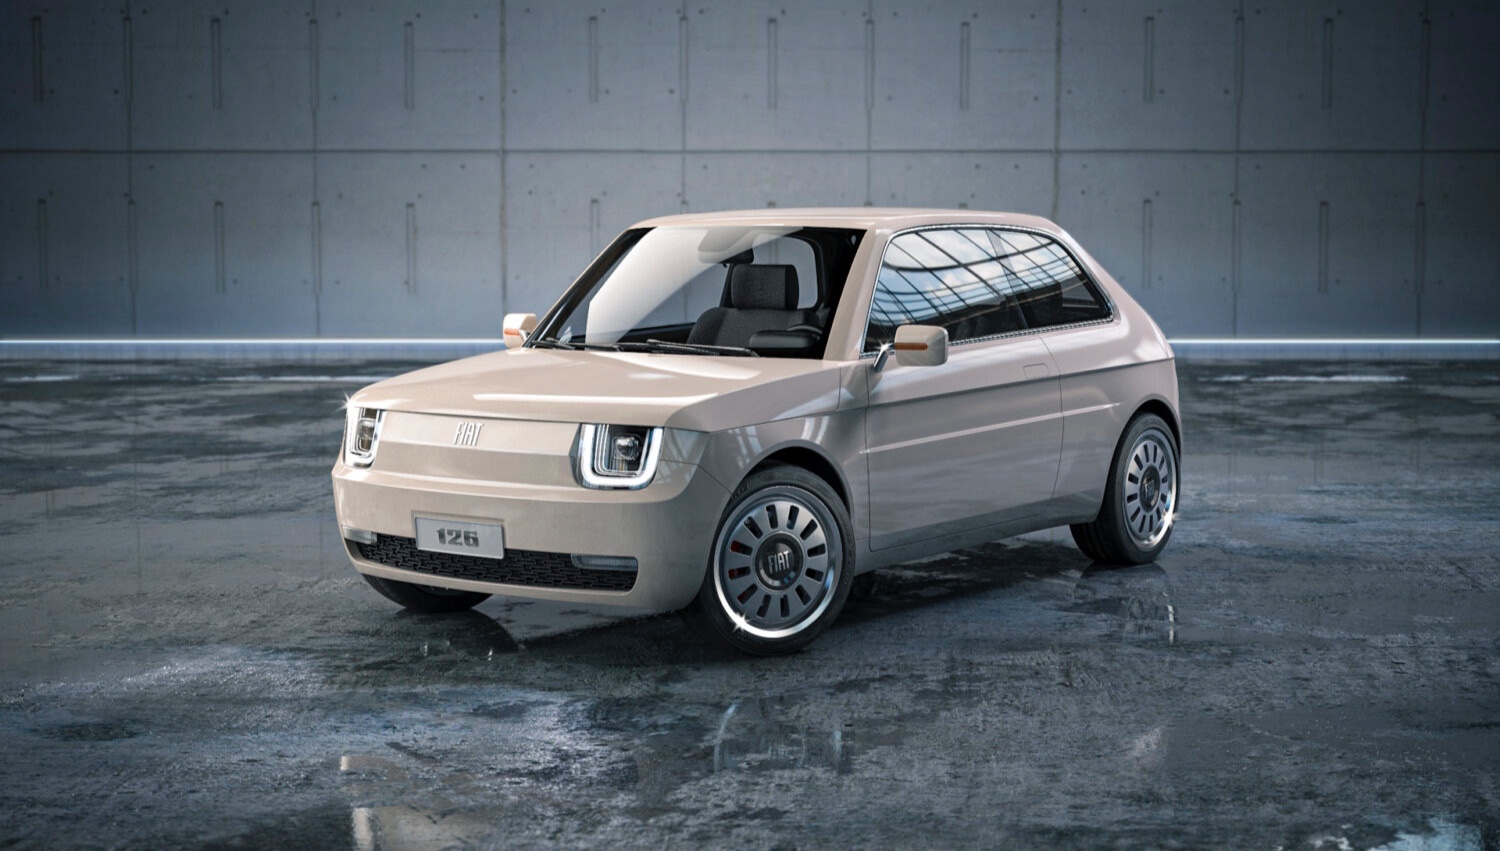 Modern version of the iconic Fiat 126p. Could such an idea succeed? 